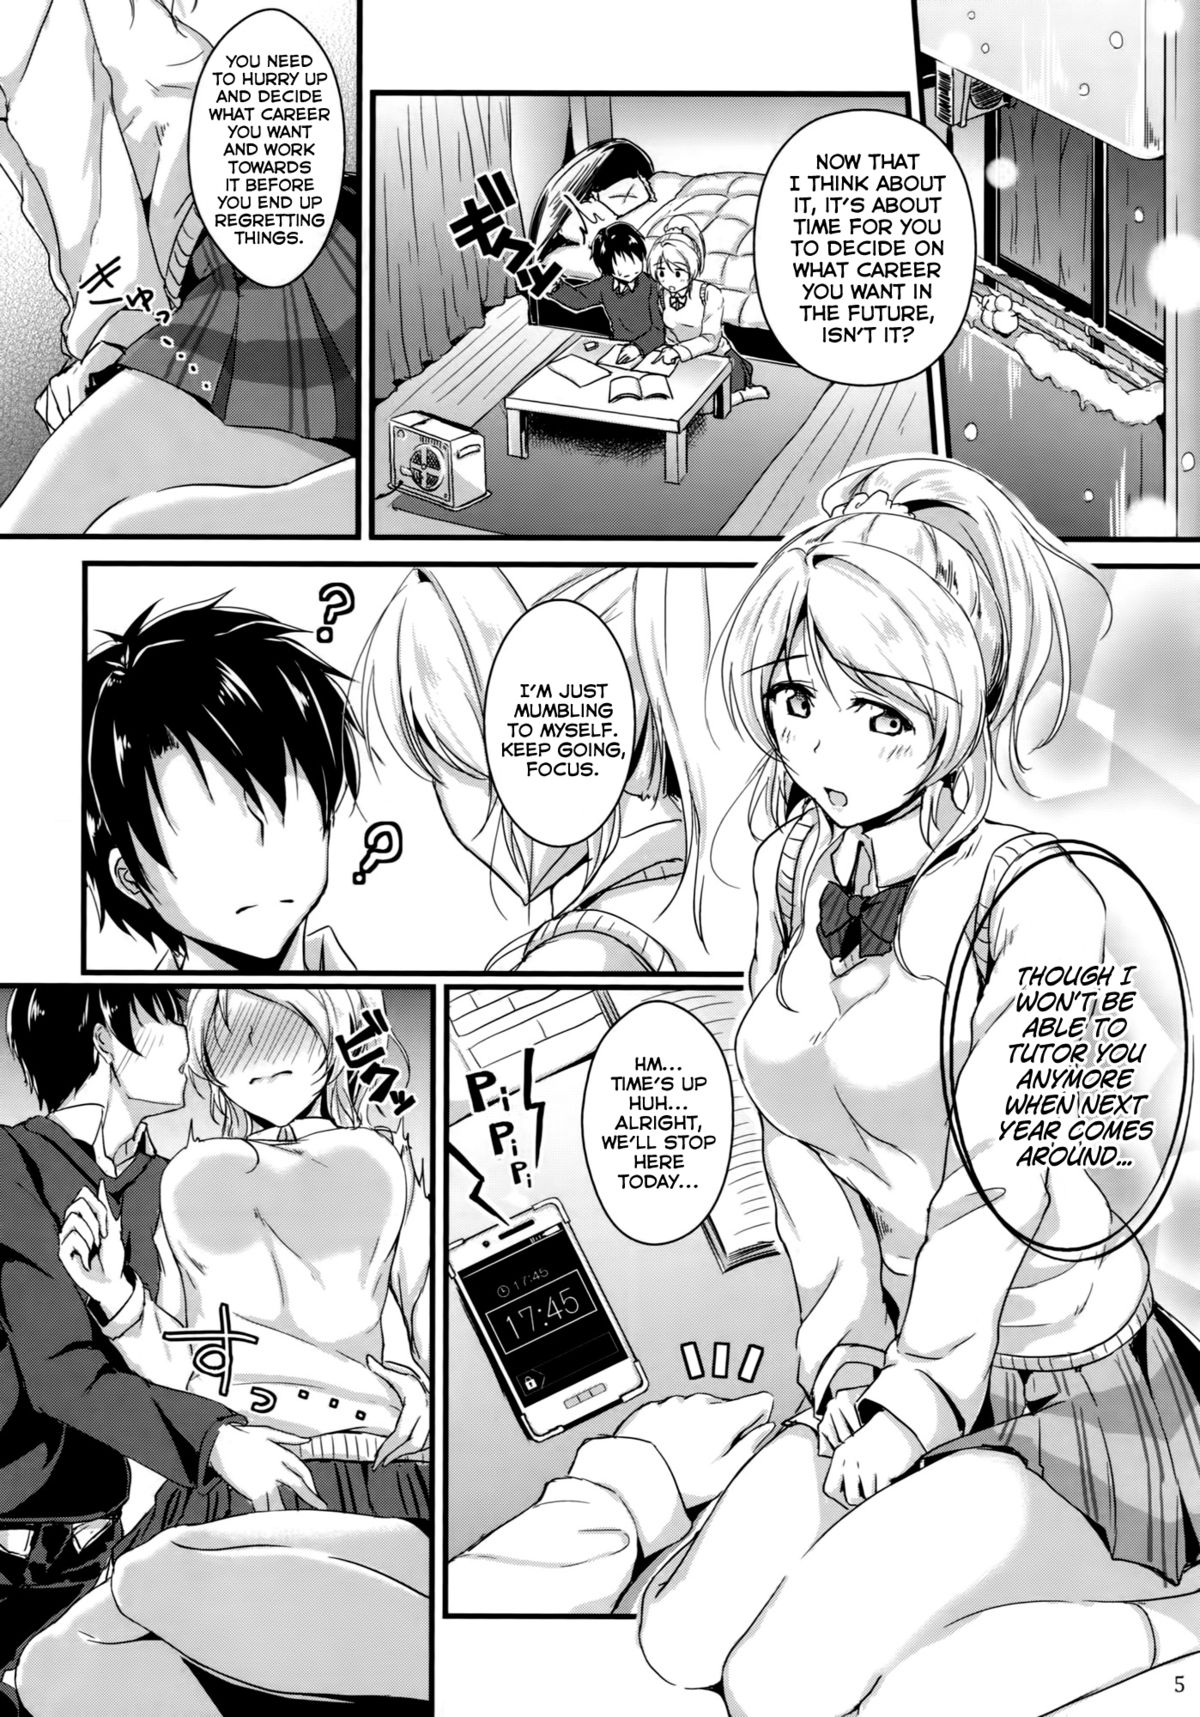 (C87) [Nuno no Ie (Moonlight)] Let's Study××× 5 (Love Live!) [English] [Facedesk] page 4 full